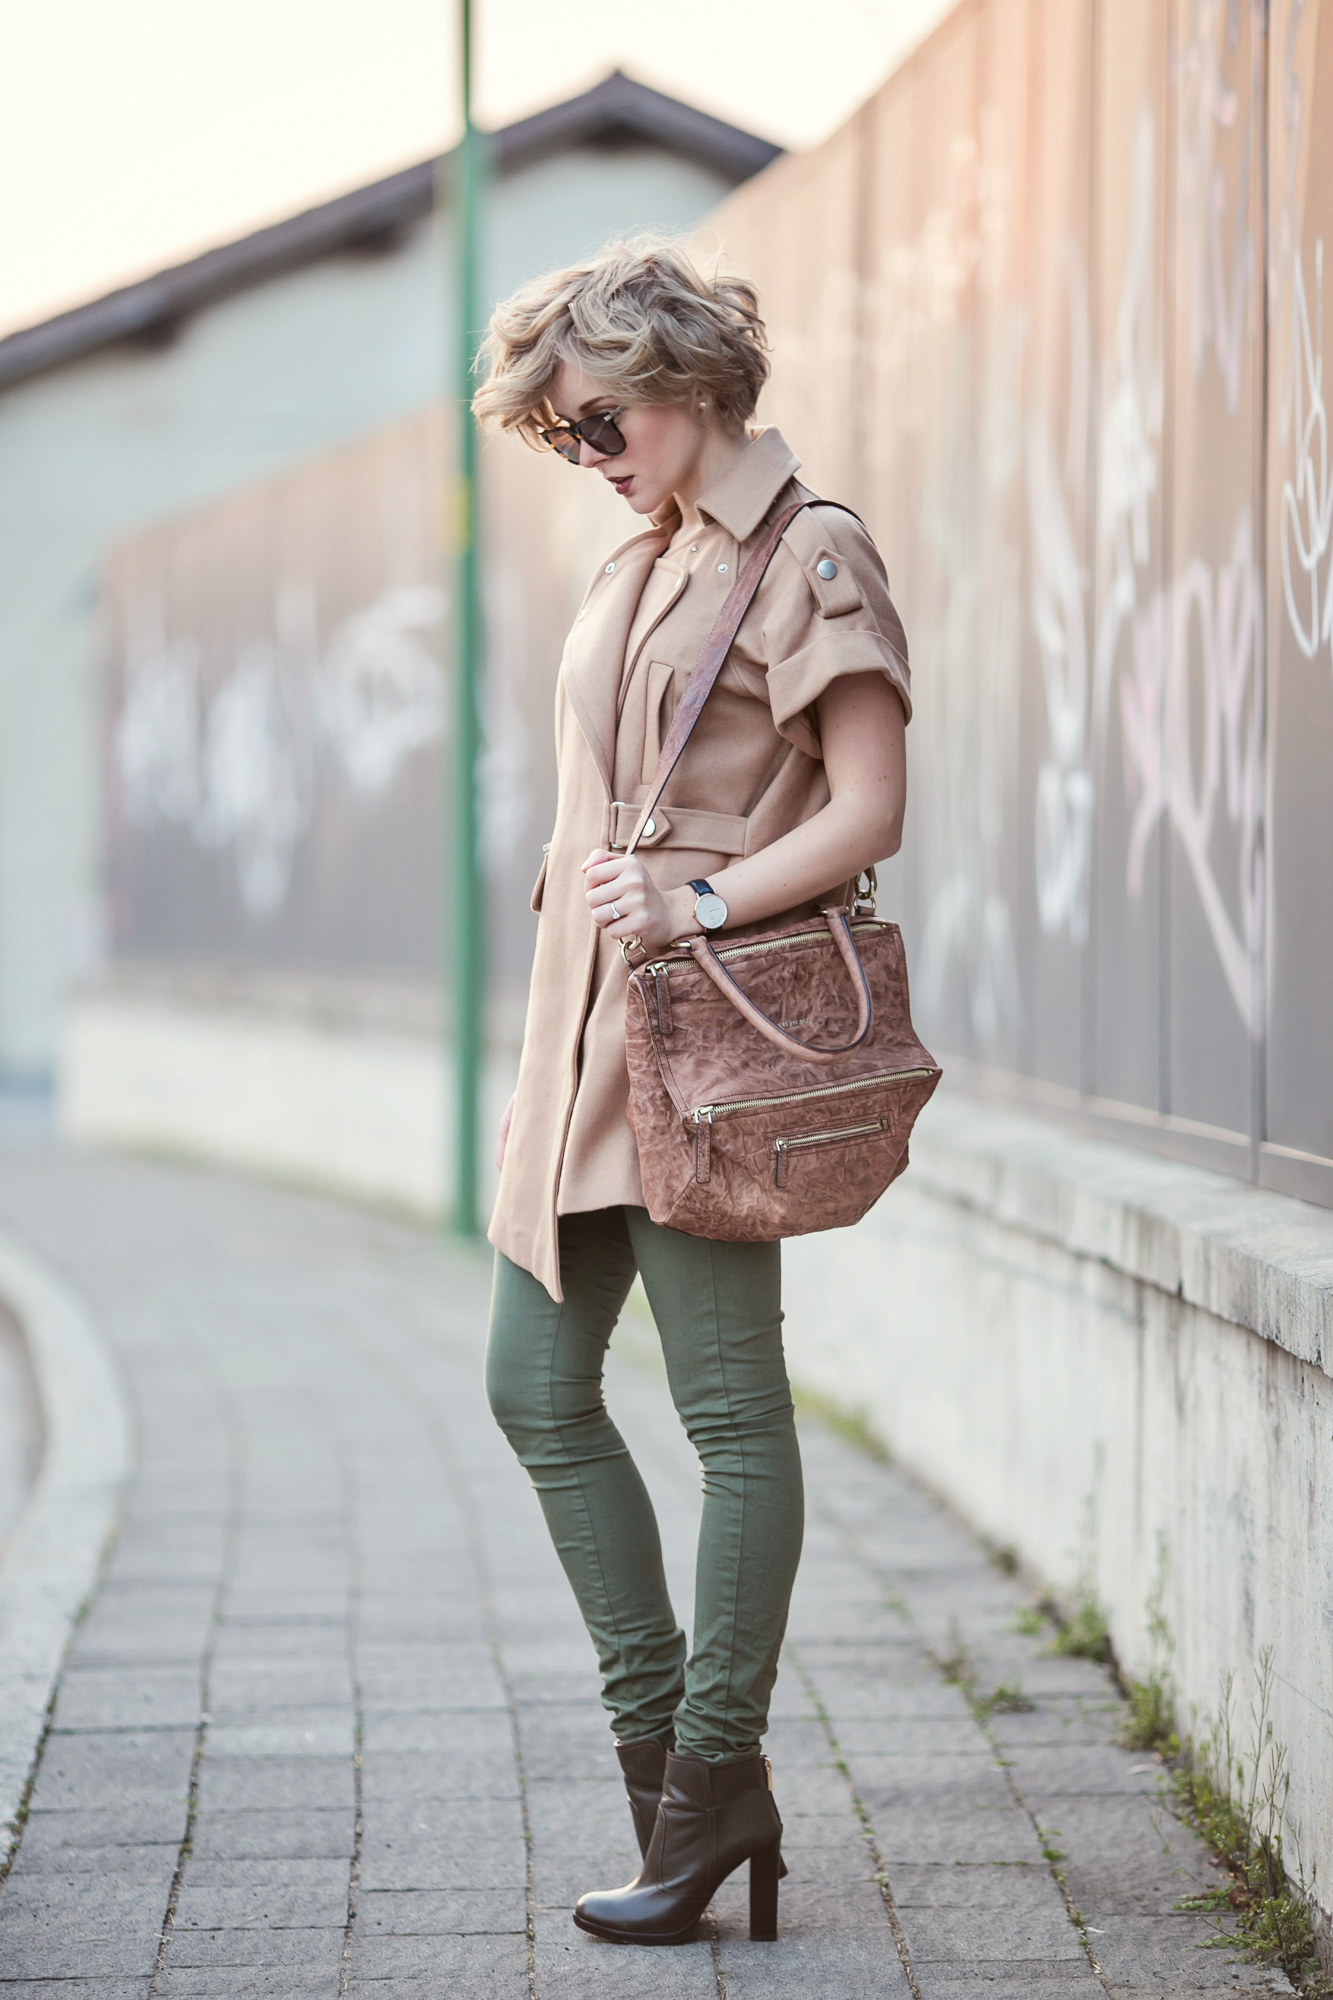 darya kamalova from thecablook com is doing a street style outfit wearing chicwish sleveless coat and givenchy pandora bag with tory burch booties ans asos green skinny pants on the sunset copy